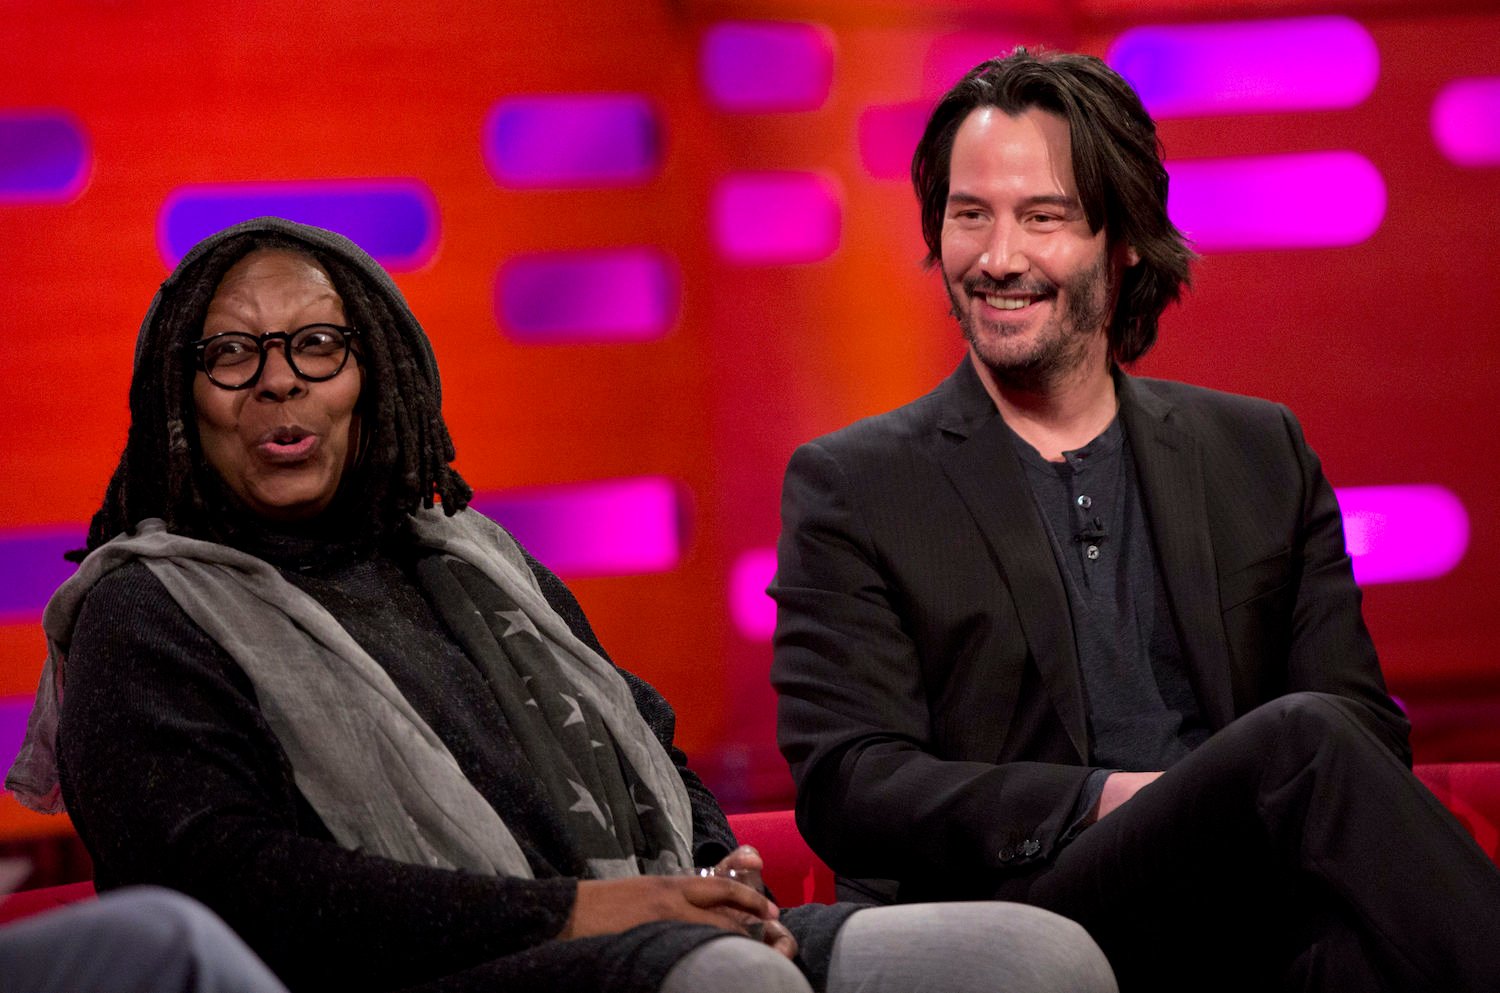 Whoopi Goldberg and Keanu Reeves during the filming of The Graham Norton Show